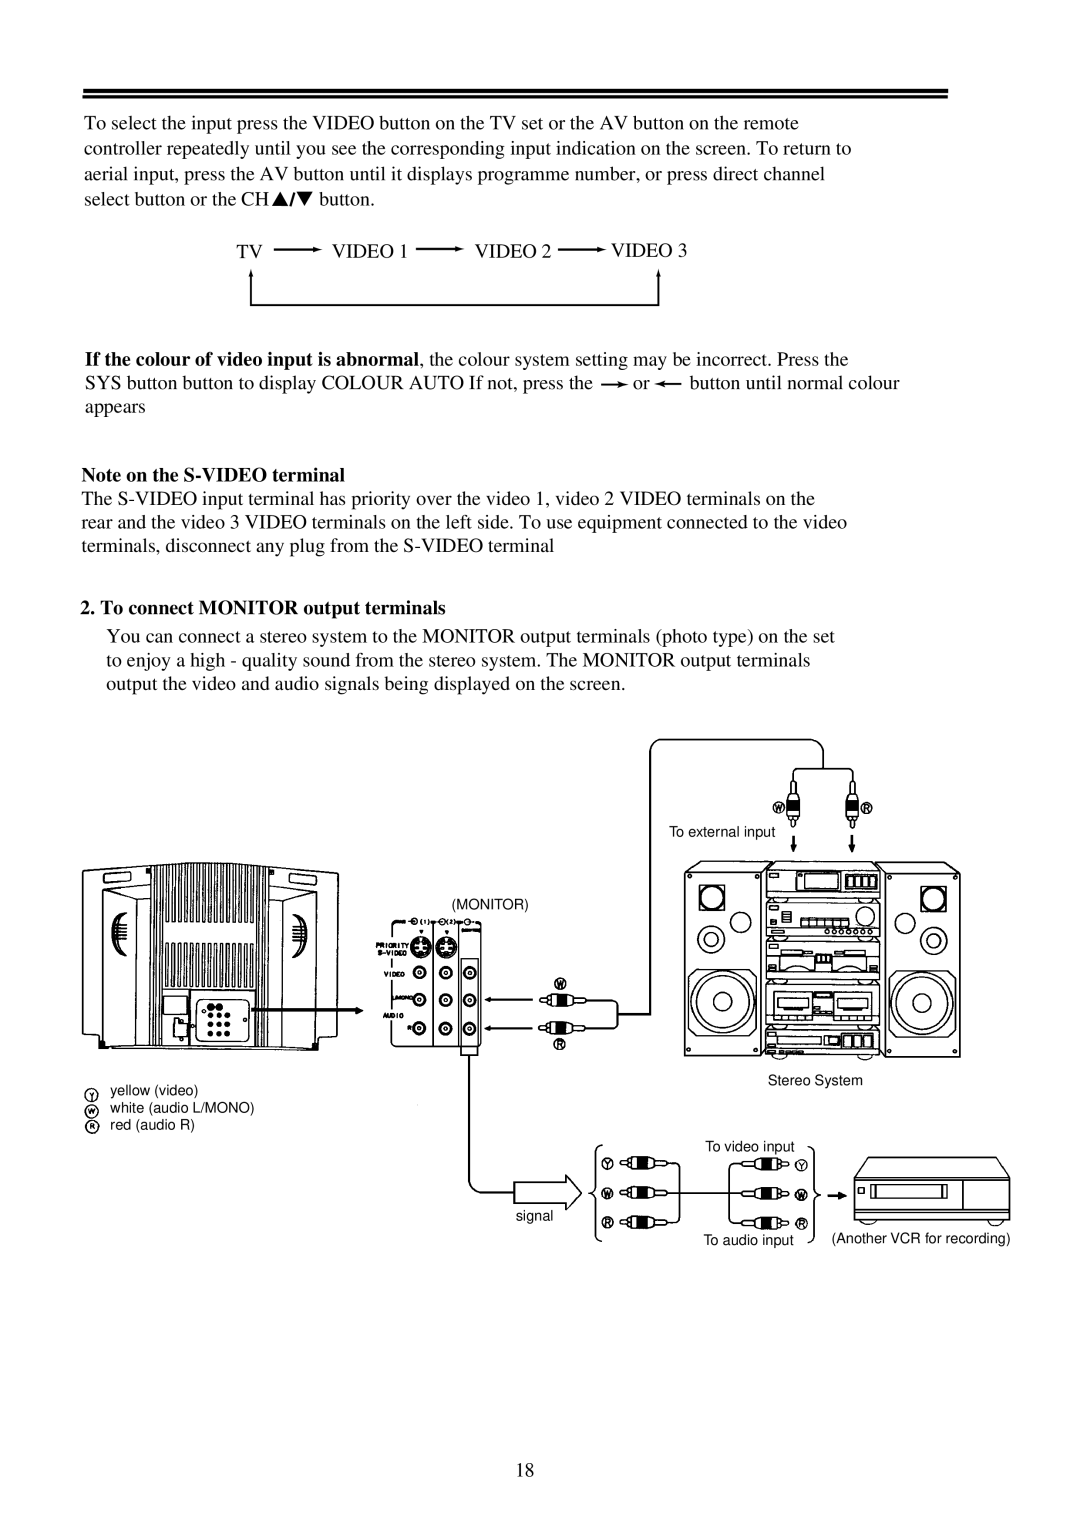 Palsonic 7118 owner manual Note on the S-VIDEO terminal, To connect MONITOR output terminals 